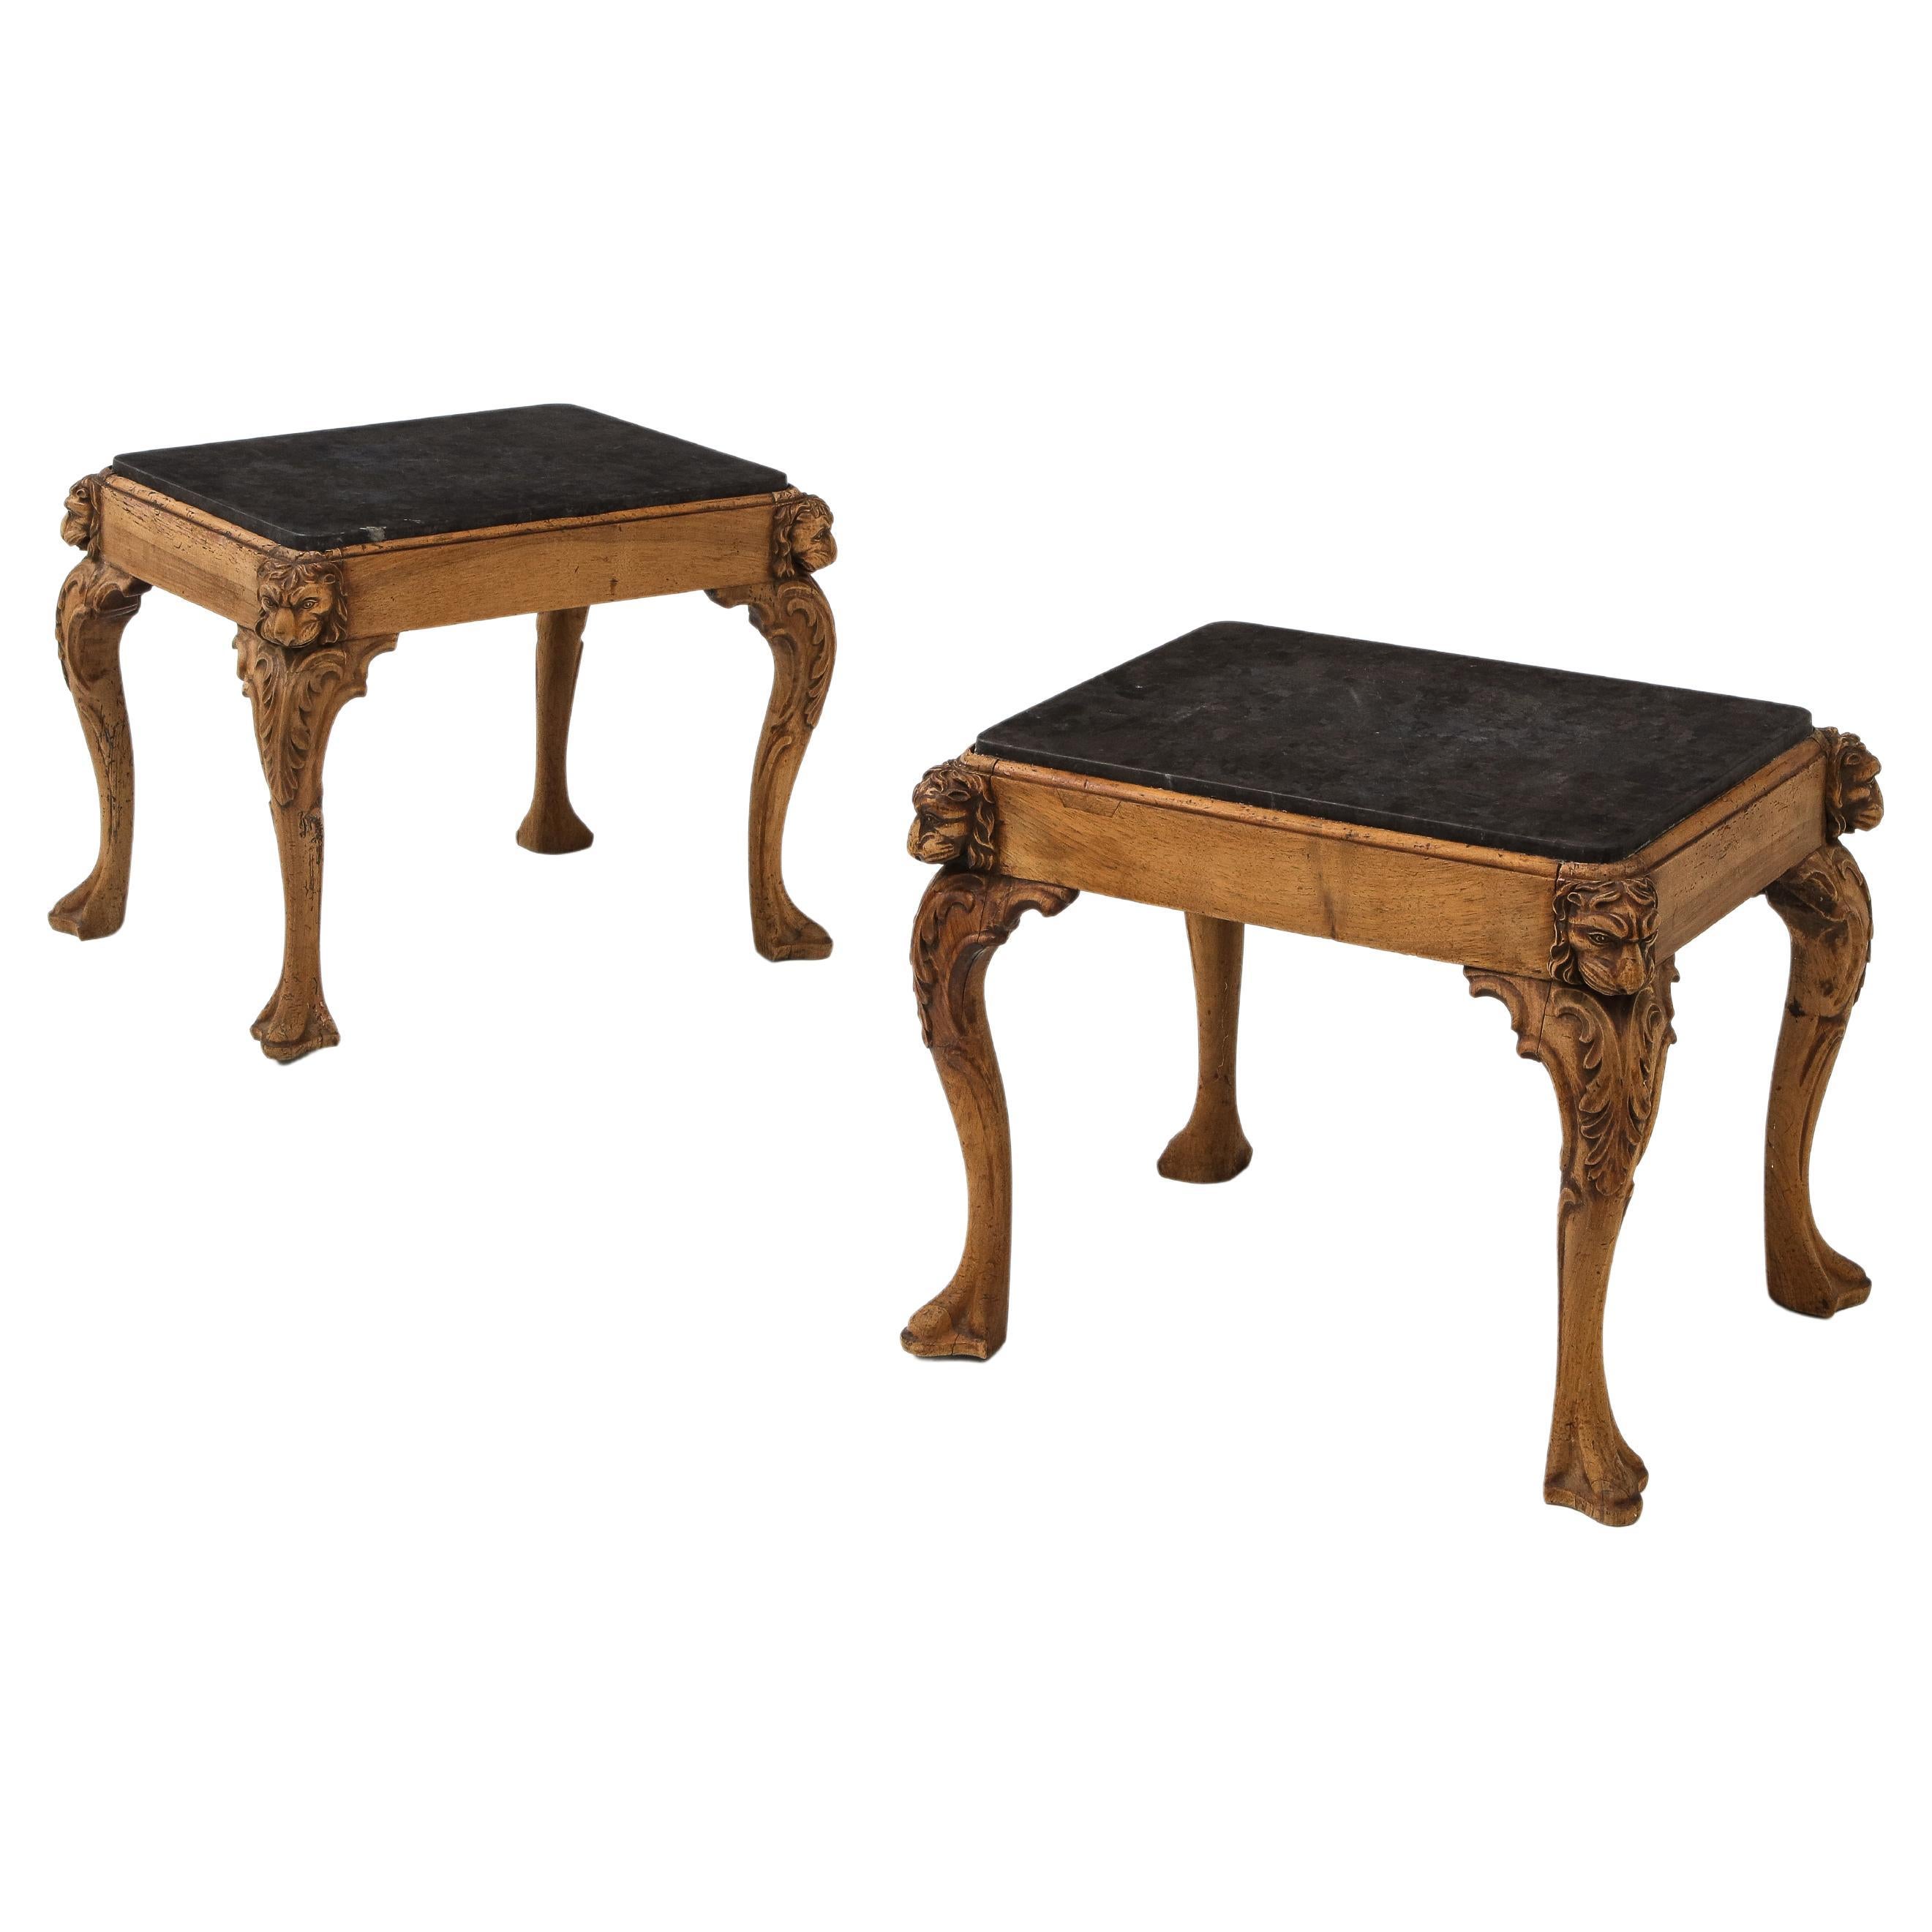 Pair of Queen Anne Style Cabriole Leg Coffee Tables, England, 19th Century For Sale